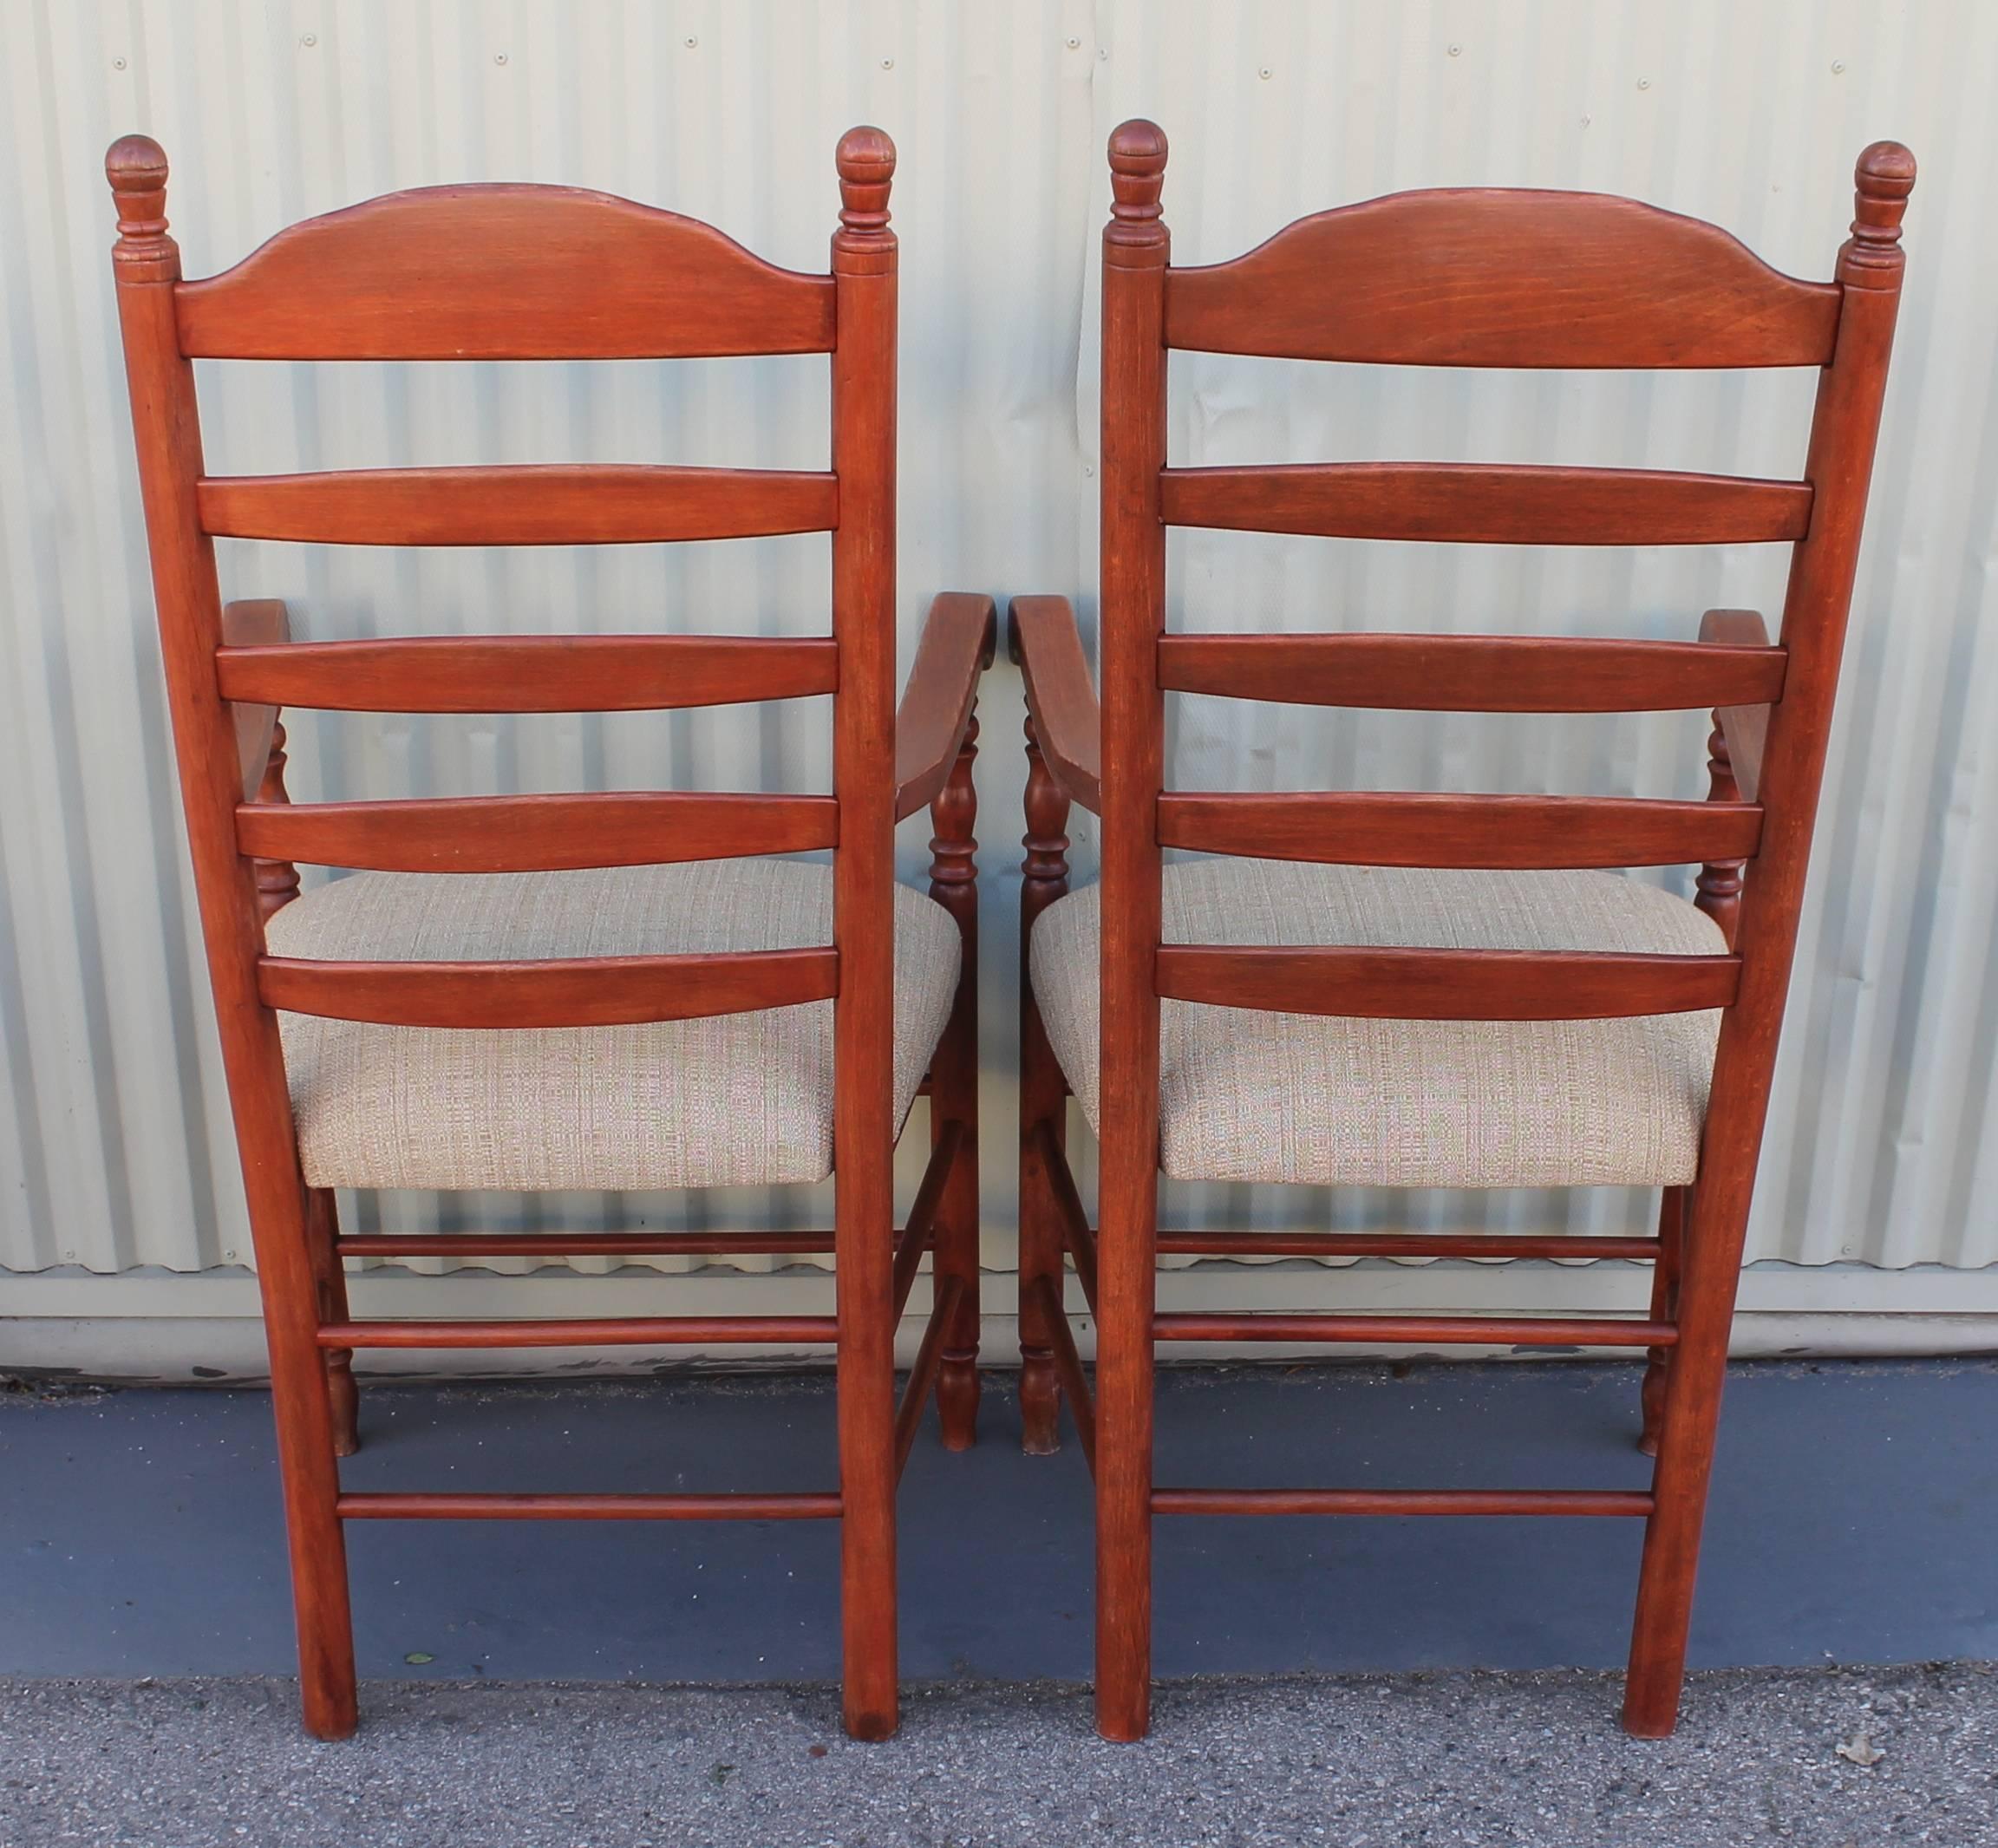 Matching Pair of 19th Century N.E. Red Painted Ladder Back Arm Chairs 1